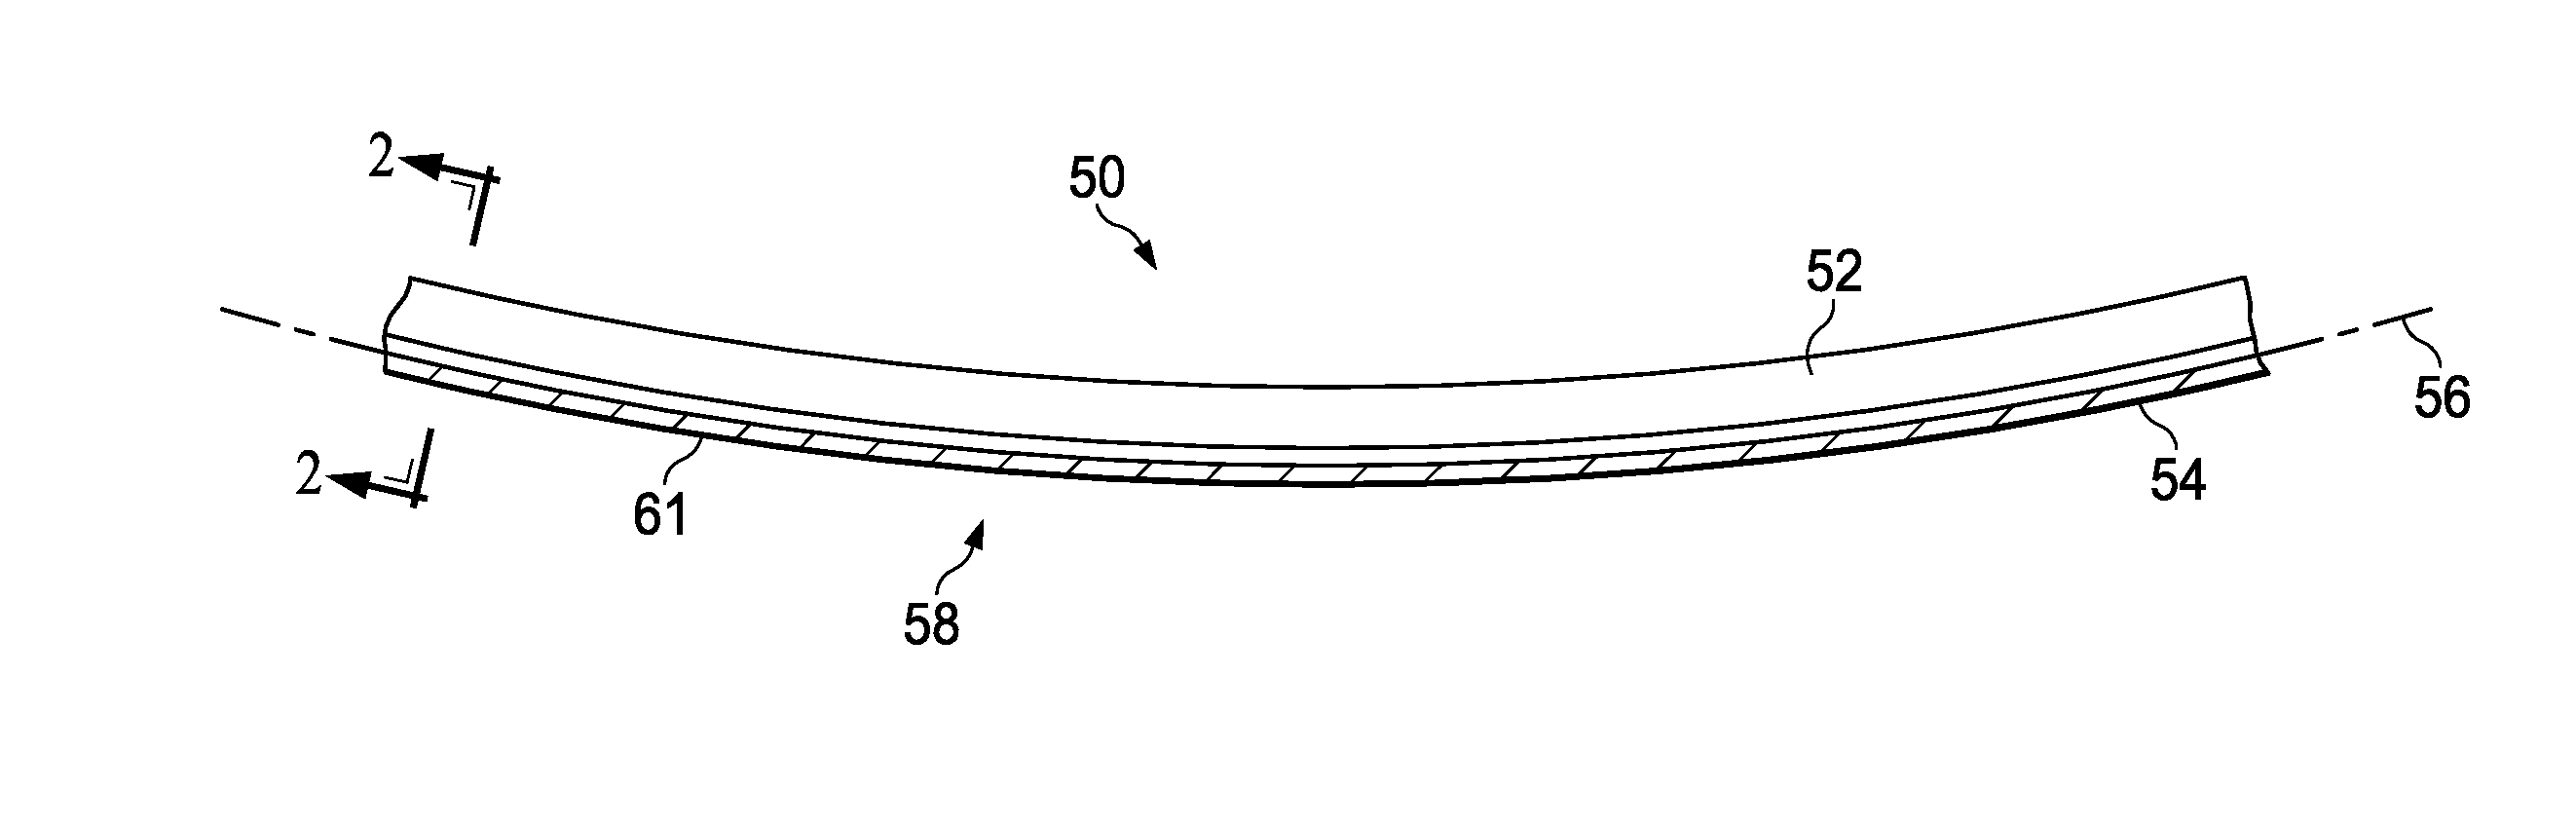 Method and Apparatus for Fabricating Variable Gauge, Contoured Composite Stiffeners